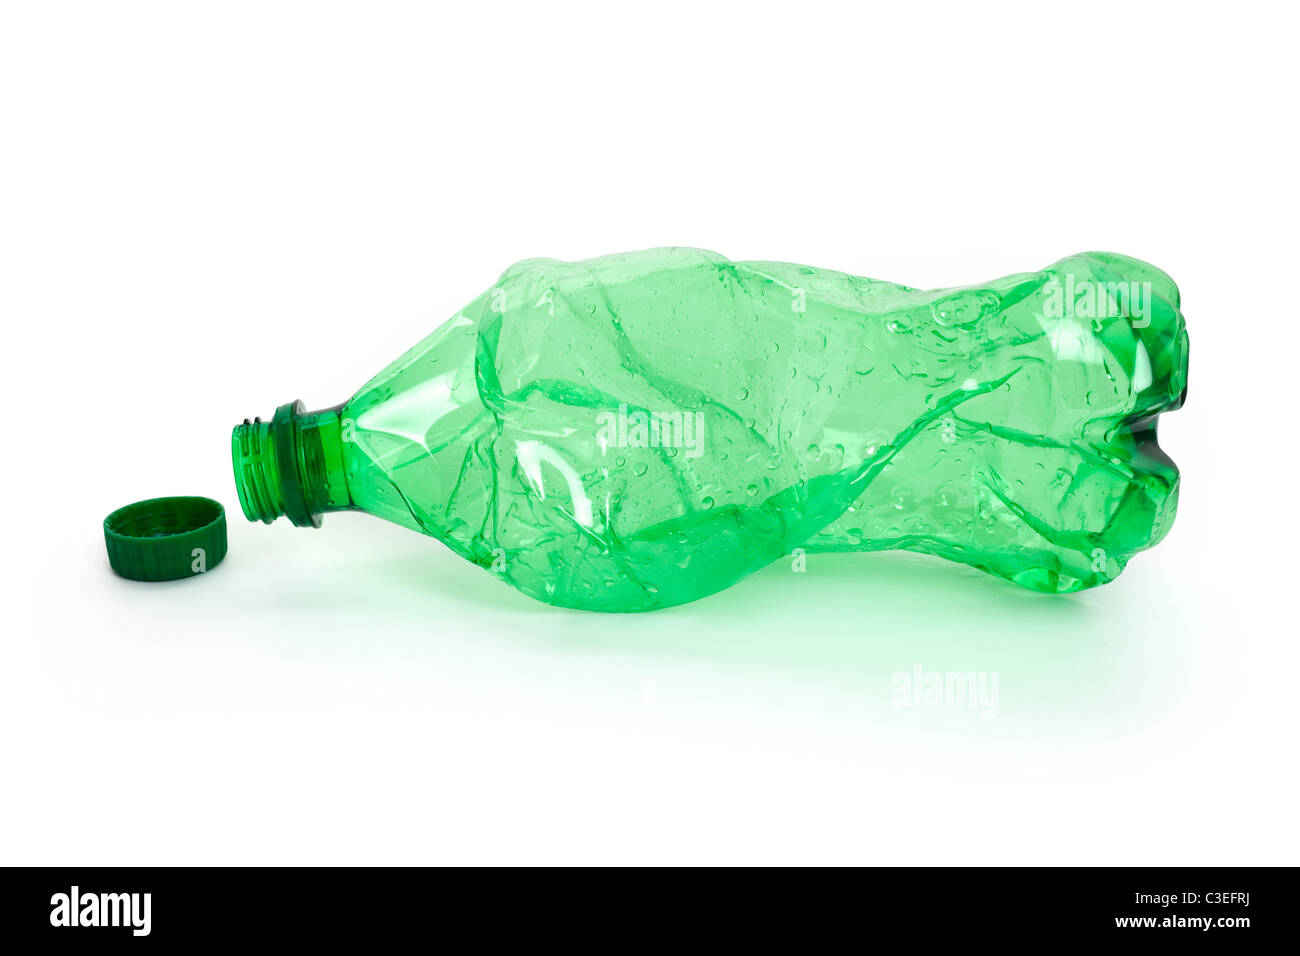 Crushed green Water Bottle close up Stock Photo